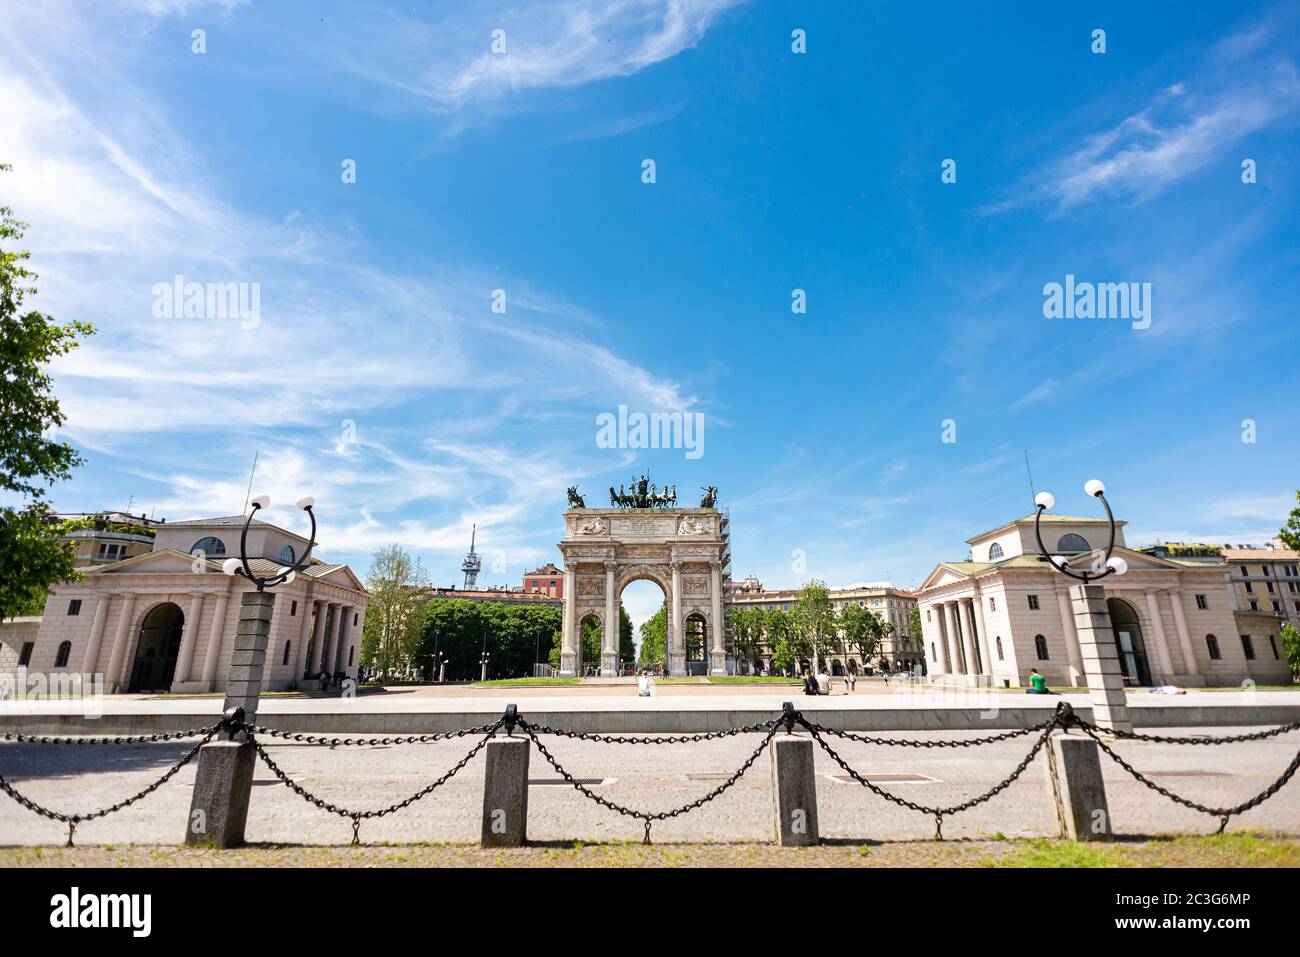 Arco della Pace or 'Arch of Peace' in Milan, Italy. City Gate of Milan Located at Center of Simplon Square. Stock Photo